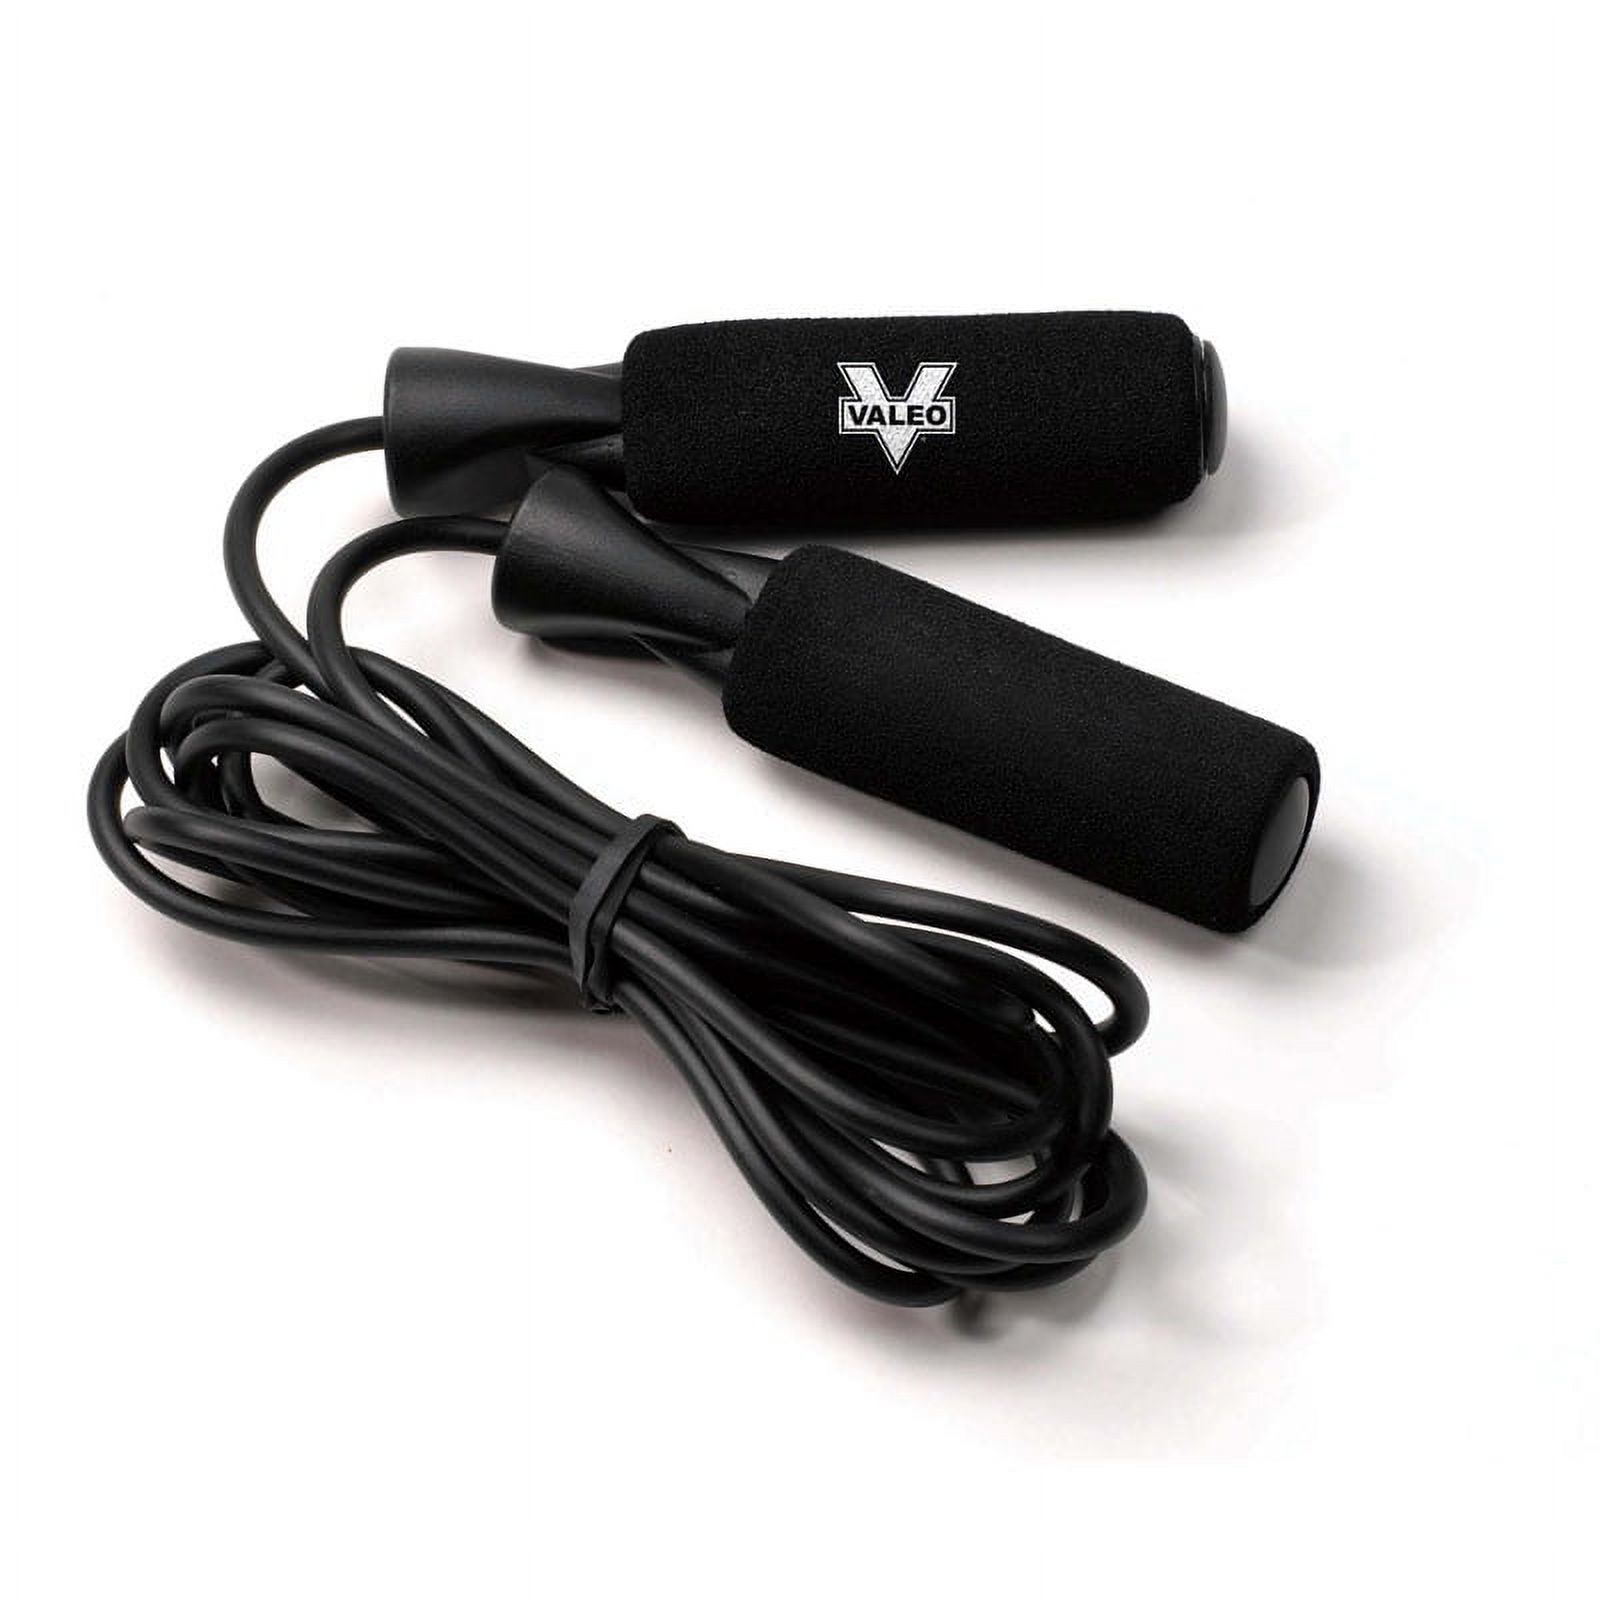 Valeo Deluxe Adjustable Speed Jump Rope To Improve Balance, Coordination, Flexibility, Core Strength and Endurance - image 1 of 2